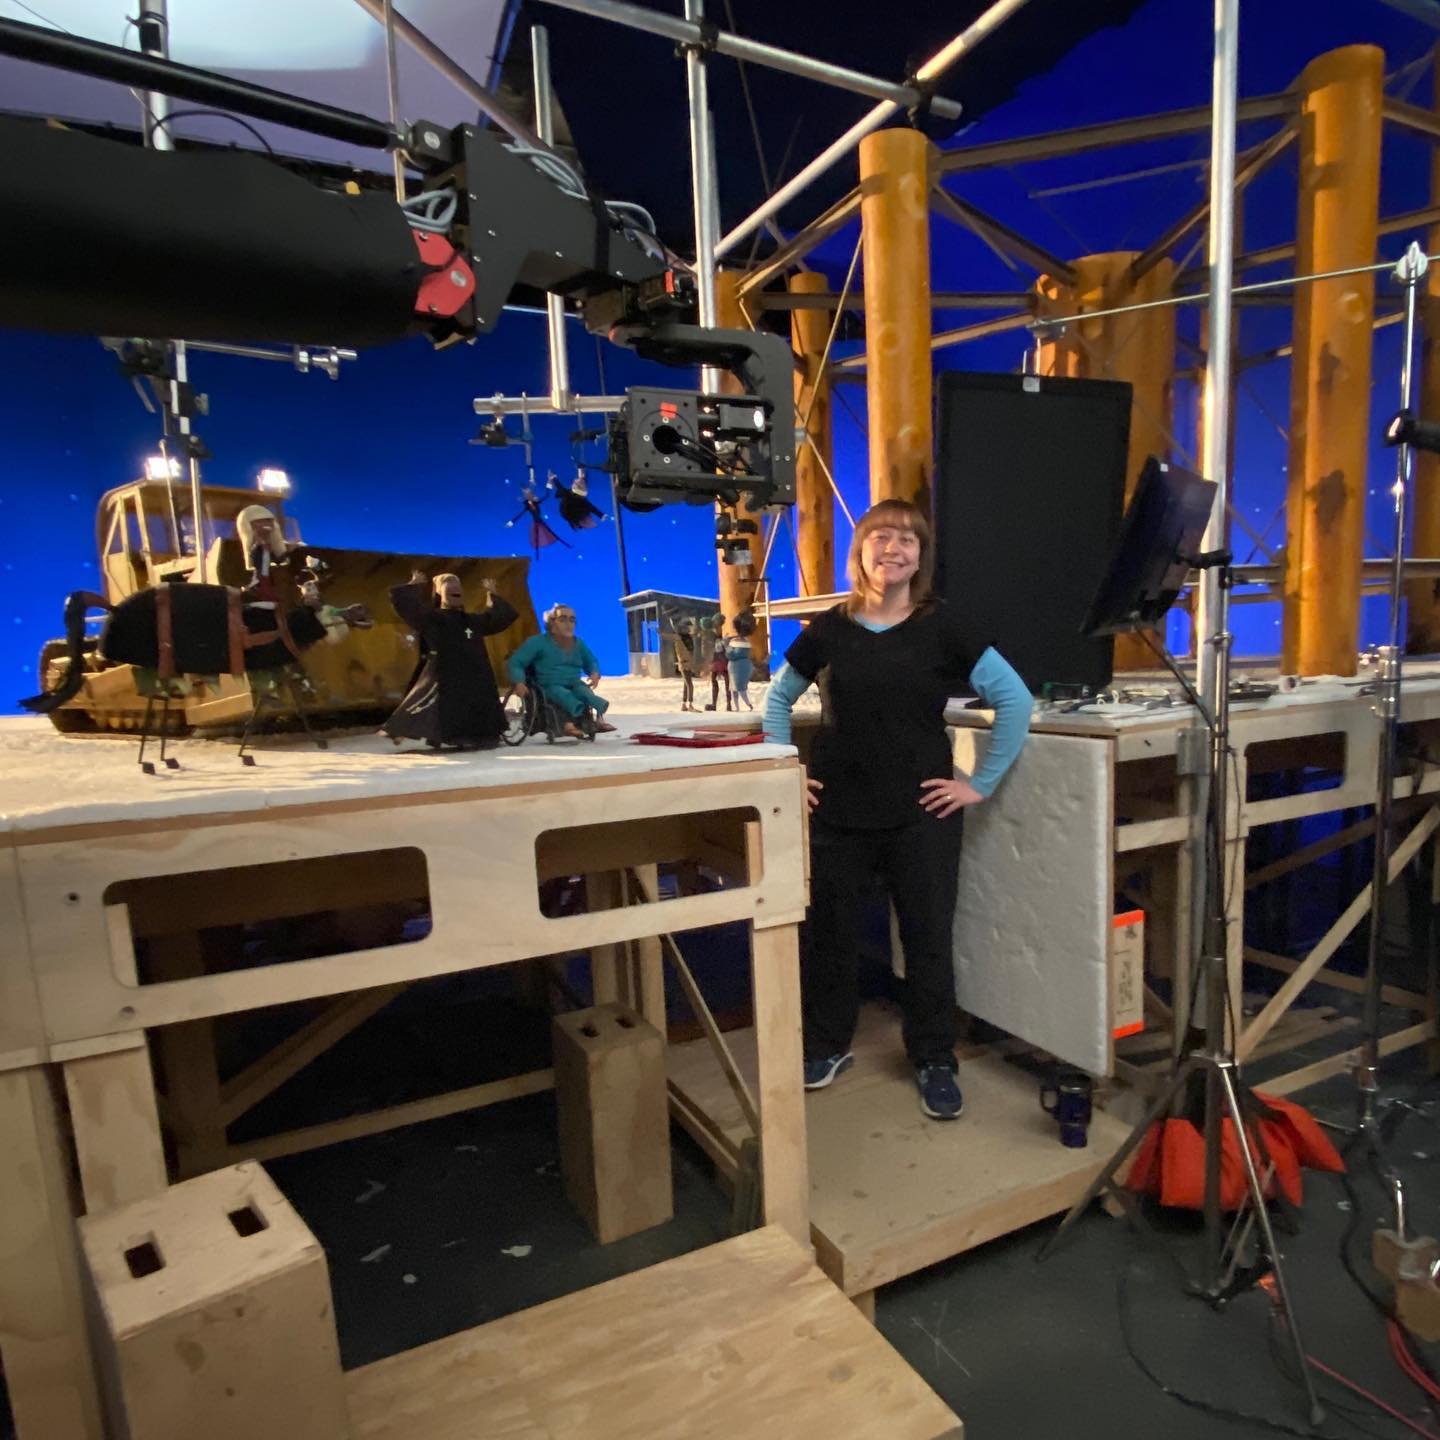 On the set for one of my final shots in the film. It was a doozy! #wendellandwild #netflix #henryselick #bts #behindthescenes #womentinanimation #stopmotionanimator #stopmotion #stopmotionanimation